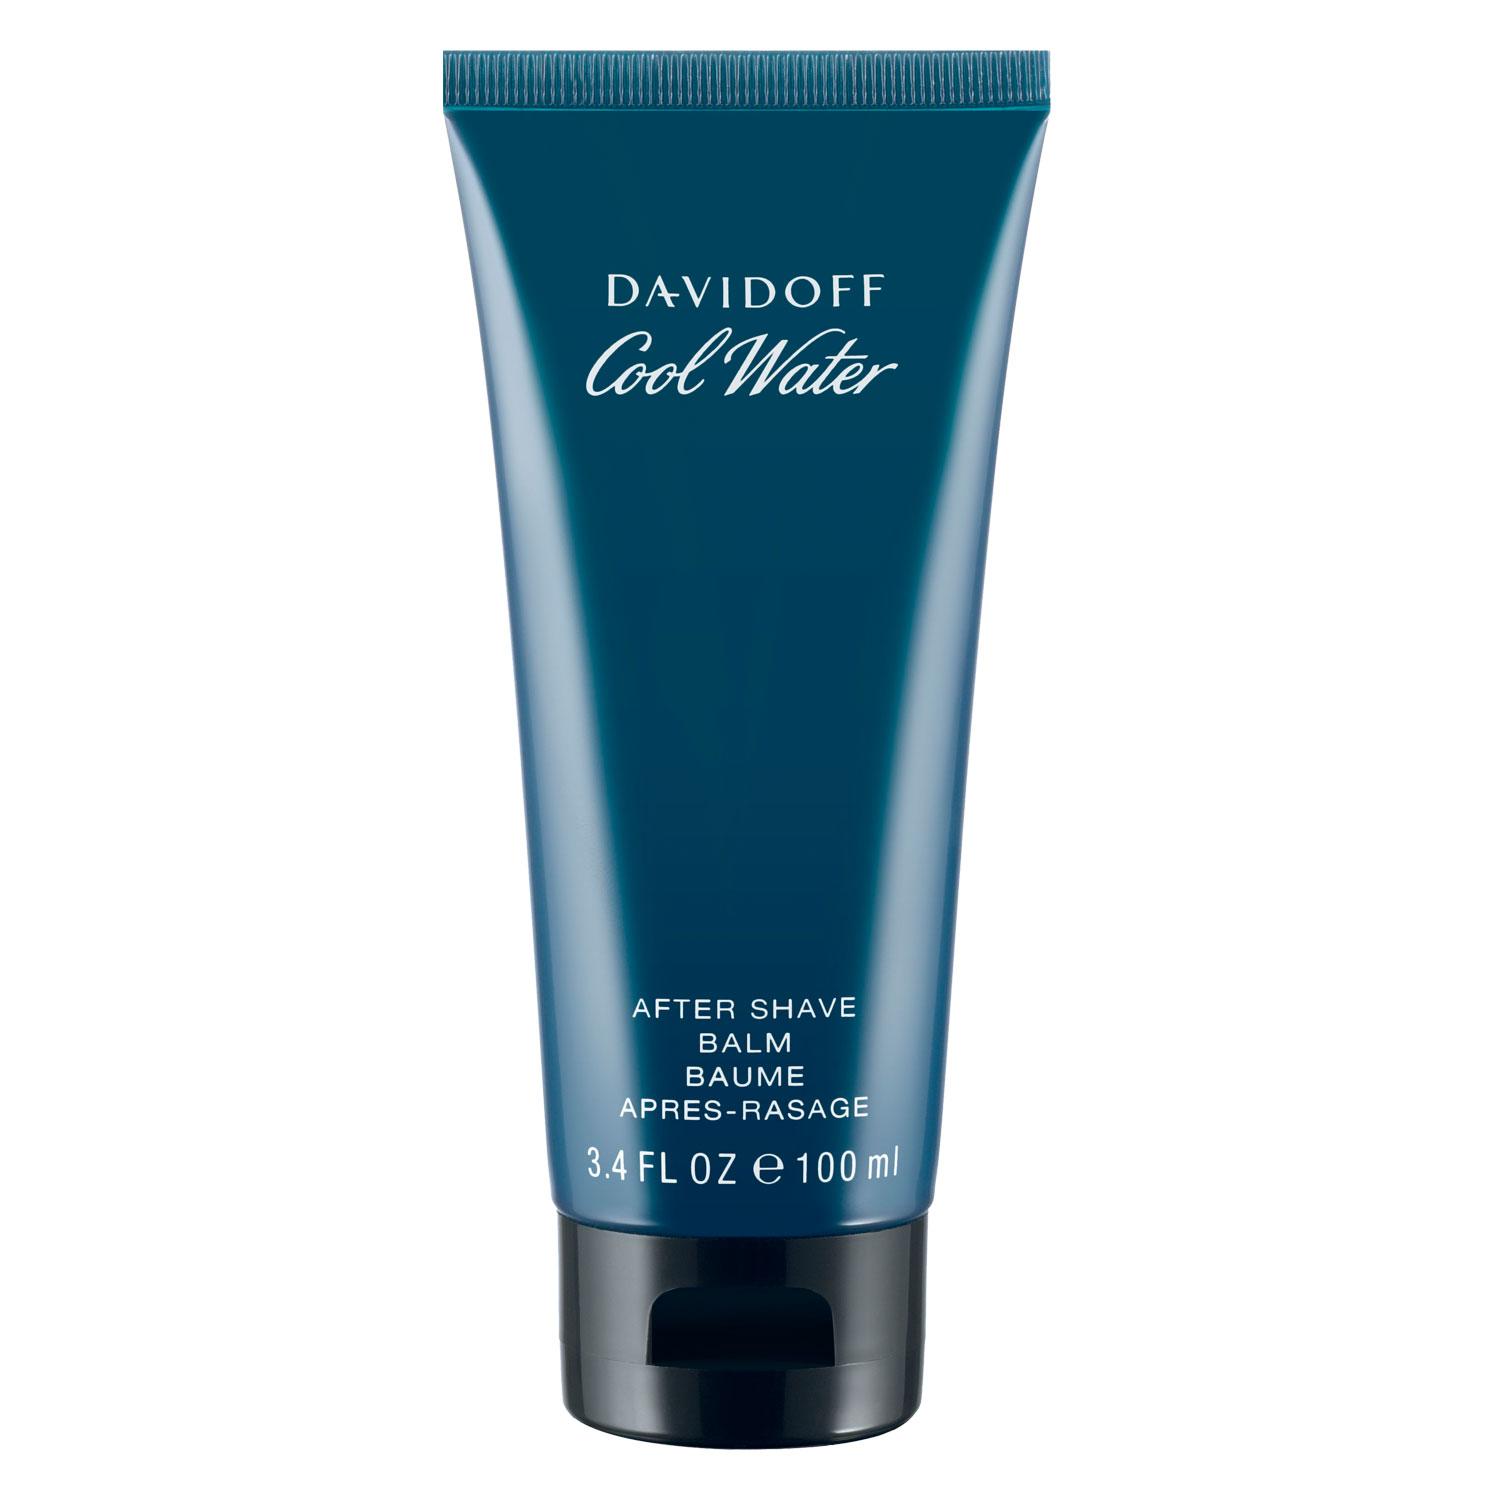 Cool Water - After Shave Balm